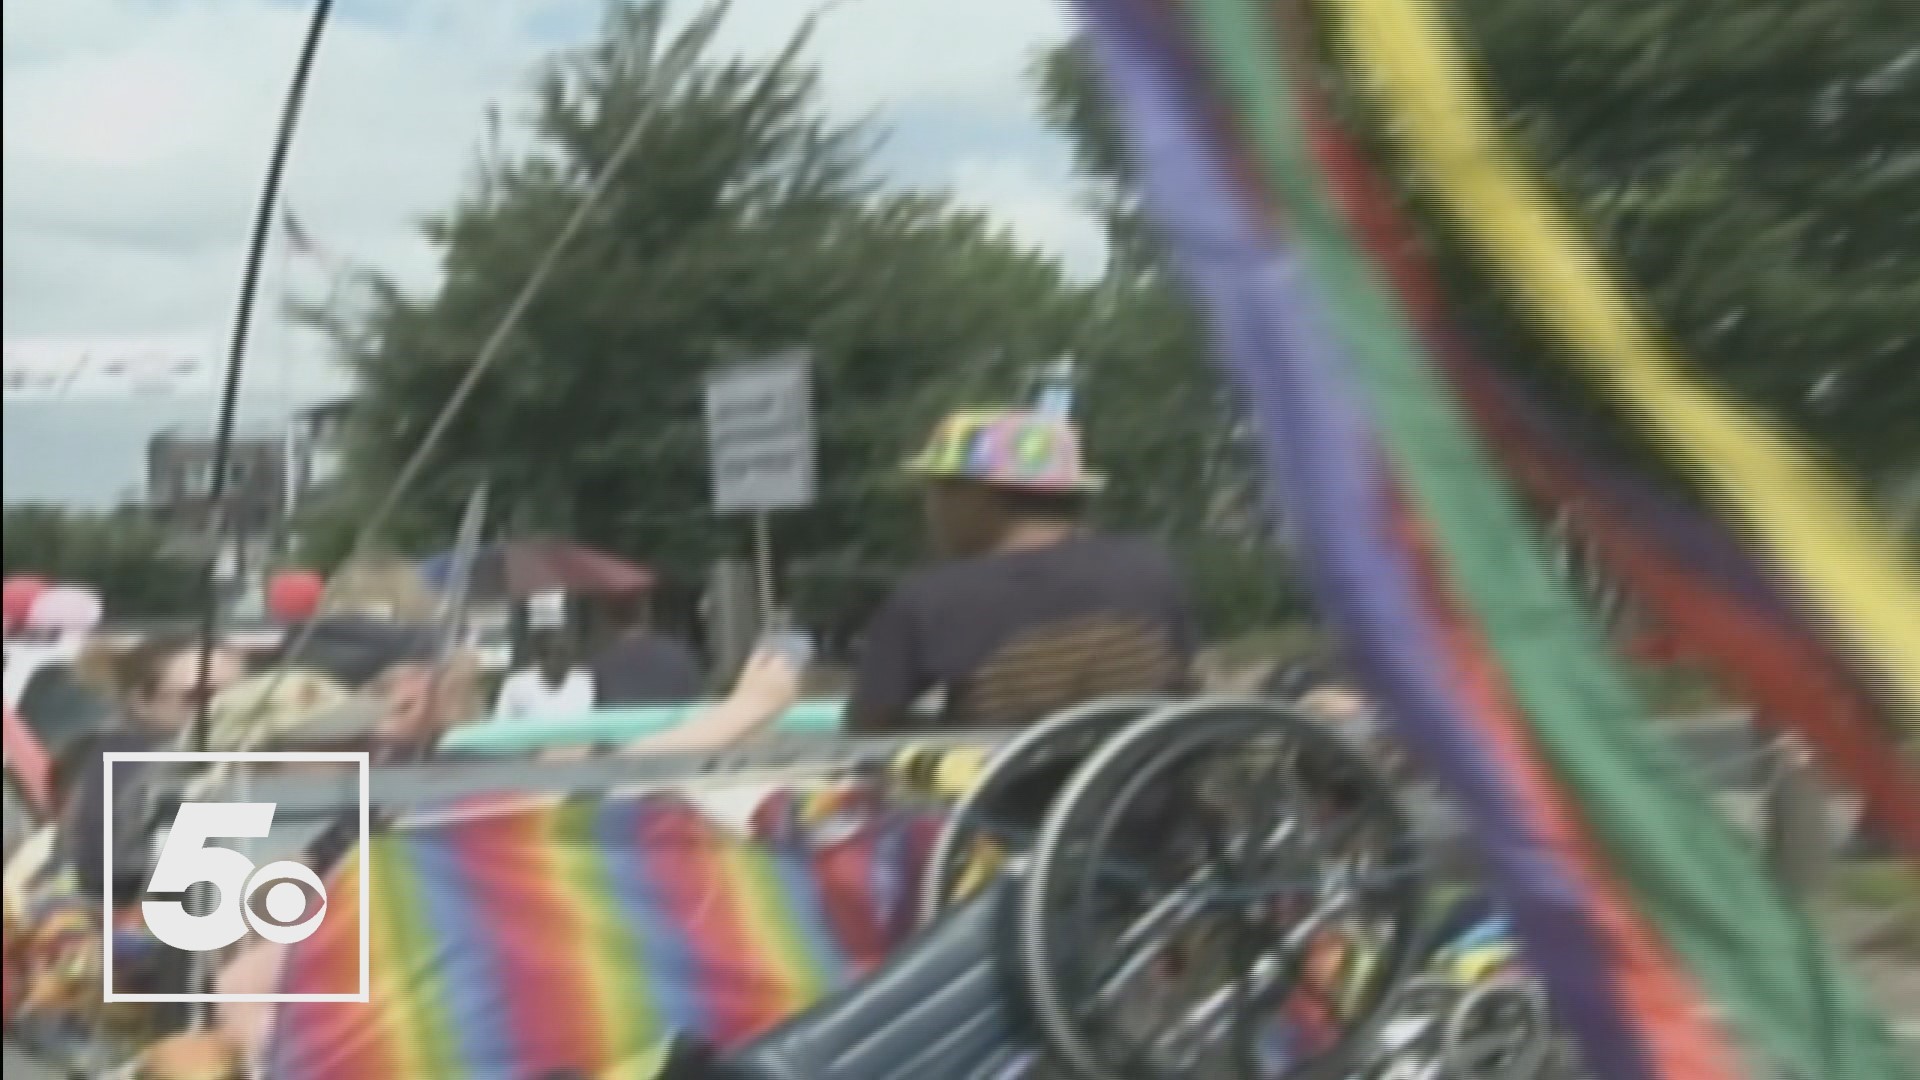 In anticipation of this year's Pride festivities, look back at a moment in Northwest Arkansas Pride history.